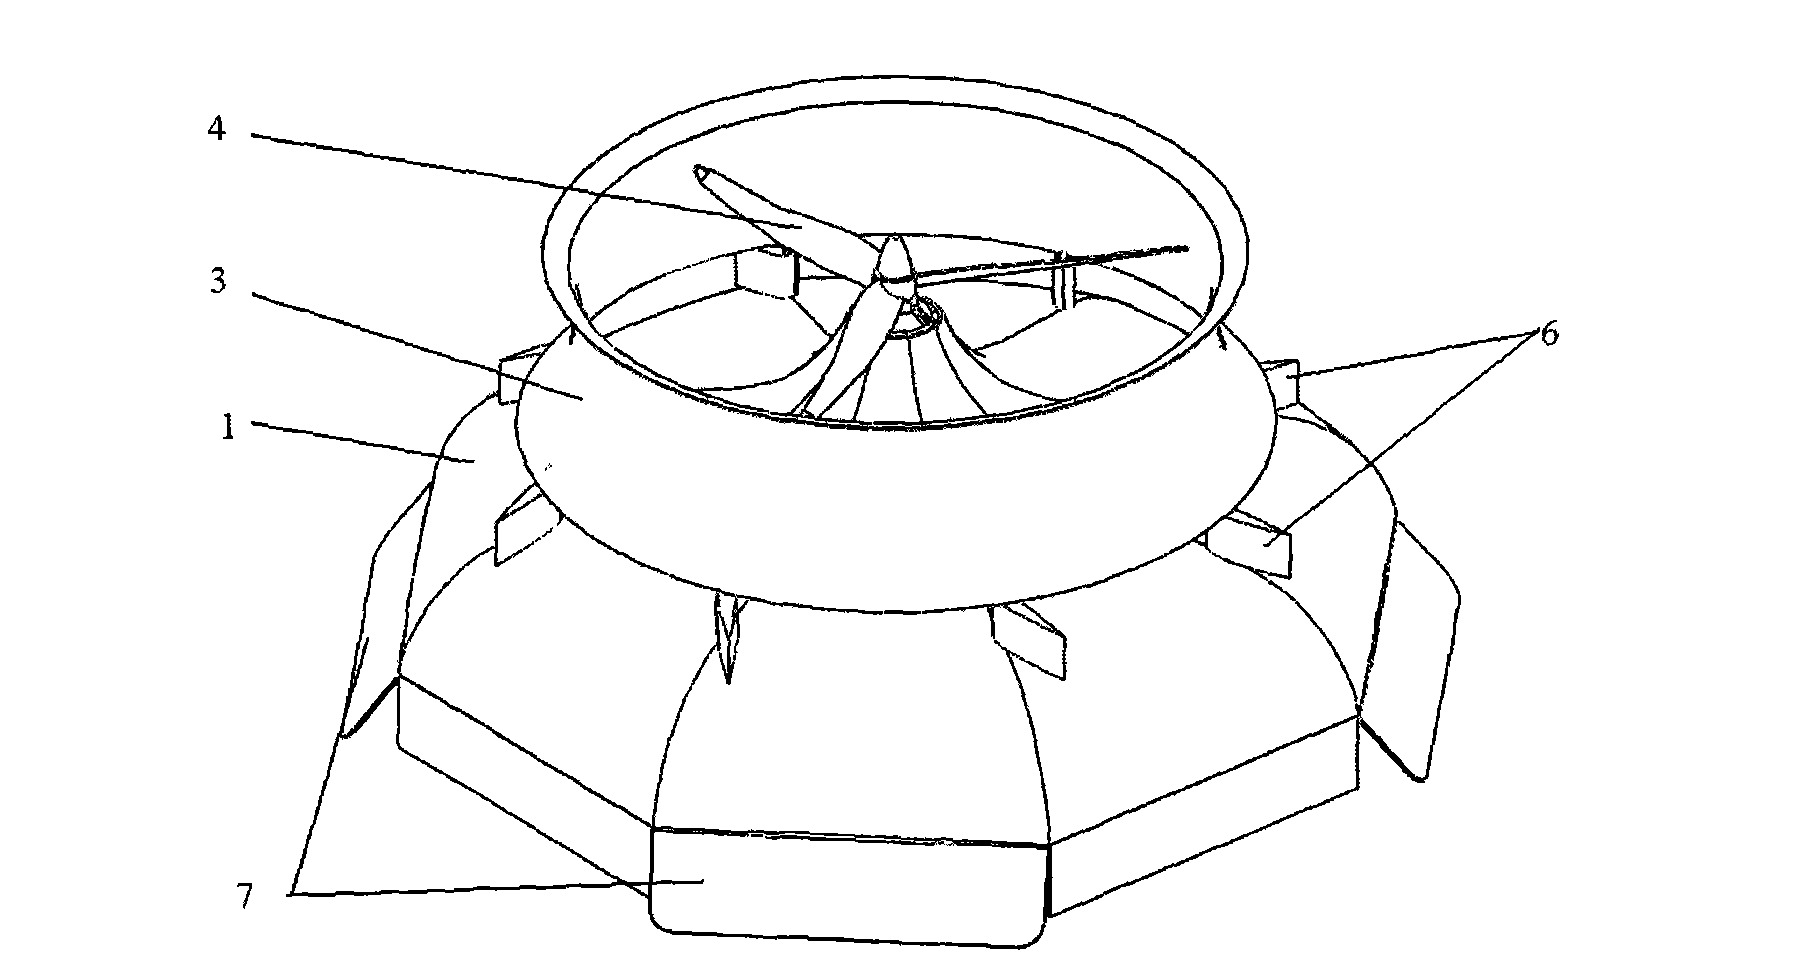 Flying saucer type helicopter utilizing active airflow to generate lifting power